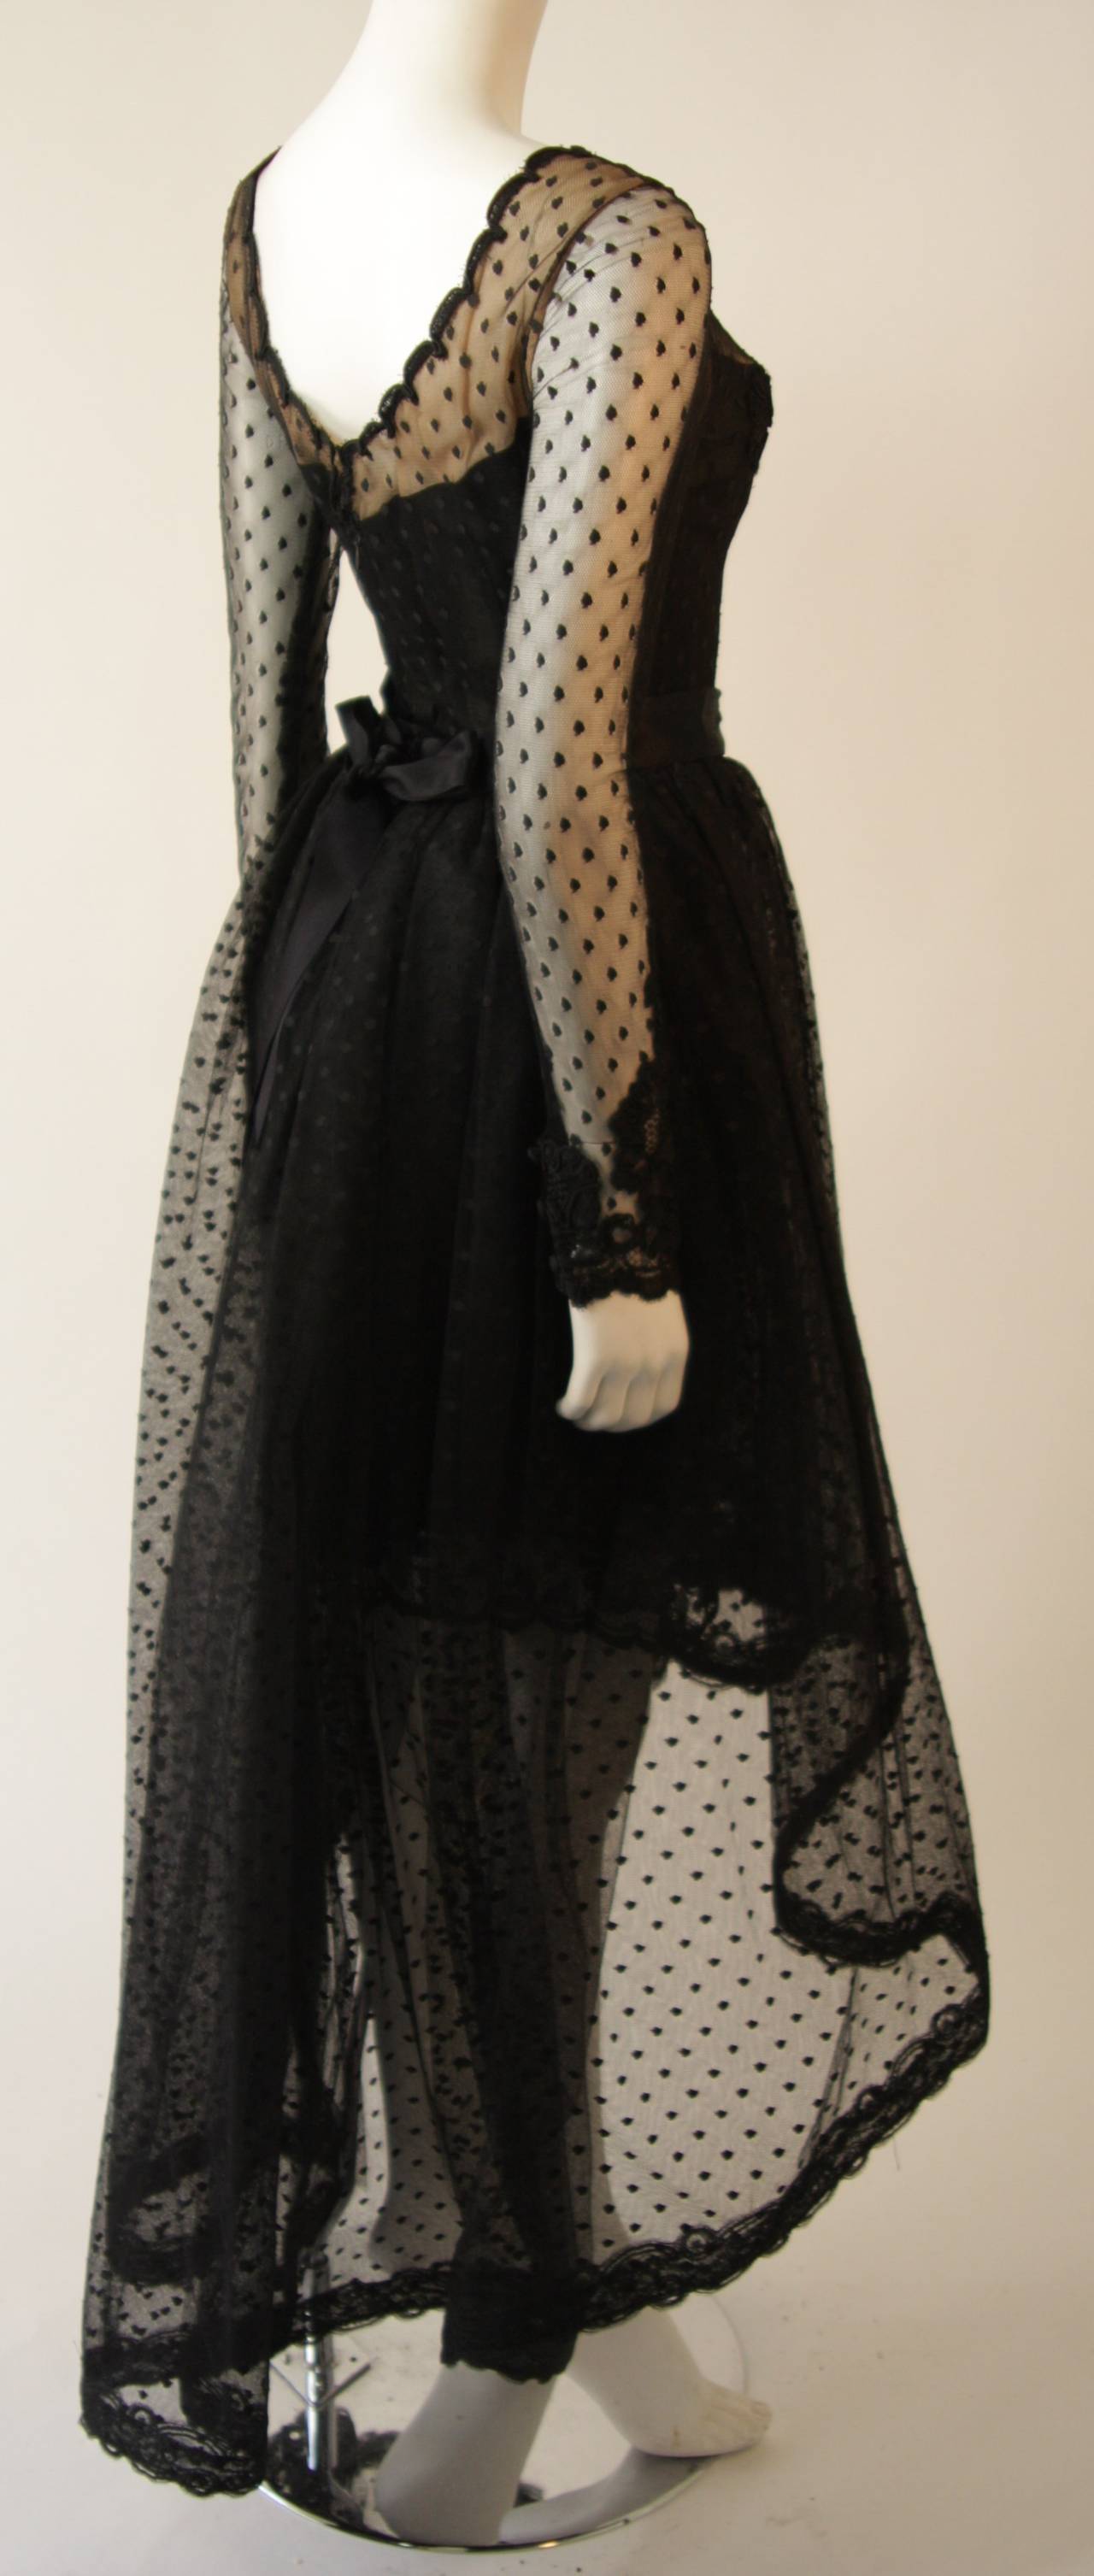 Bill Blass Black Polka Dot and Lace Cocktail Dress with Over-Skirt 2